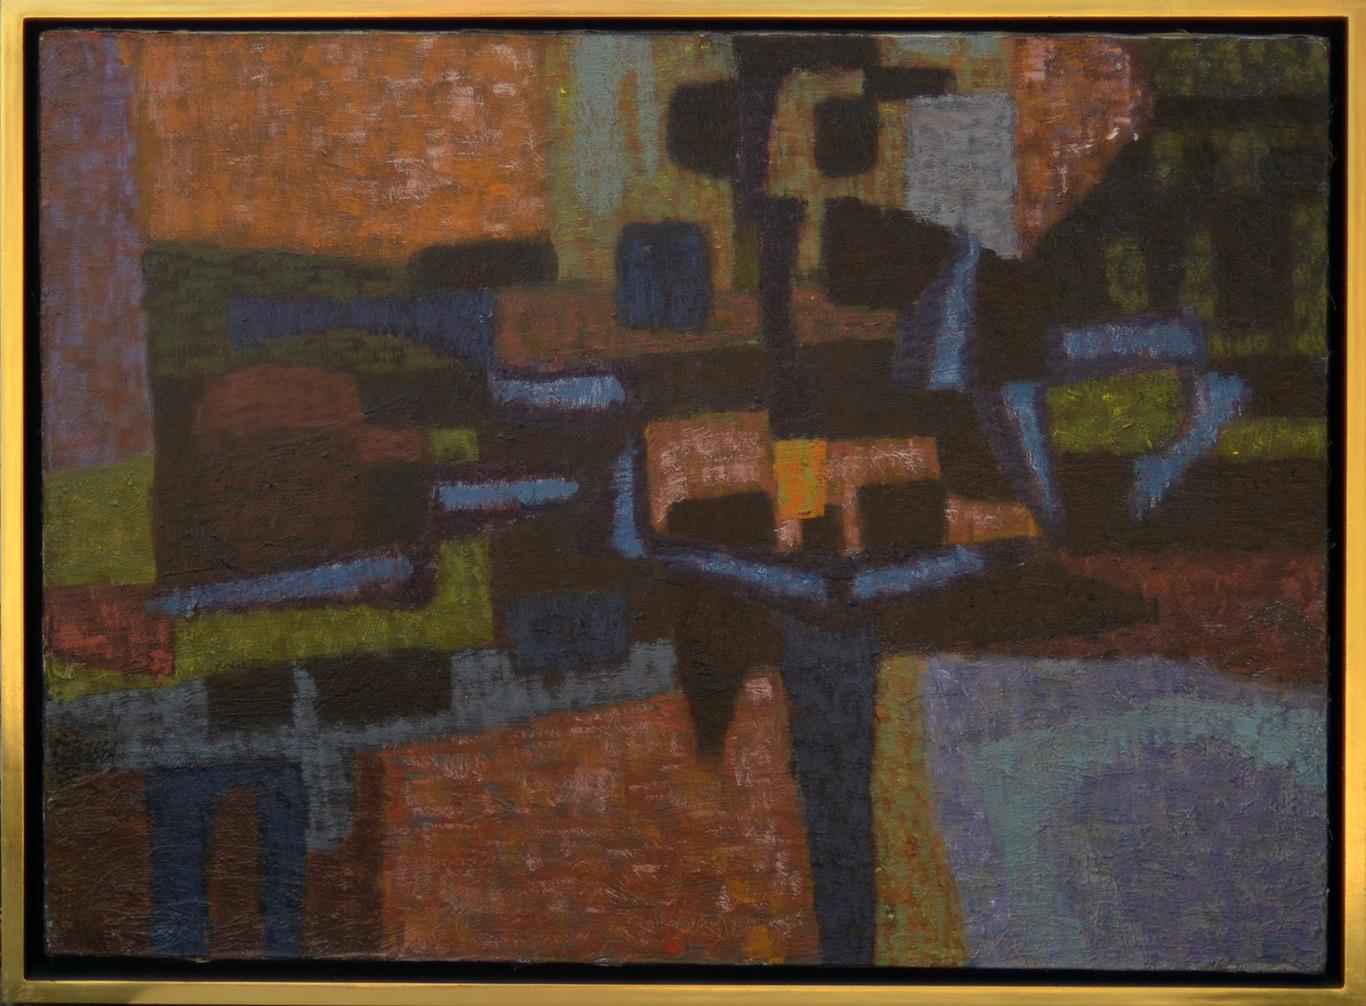 Silent Landscape, Mid Century 1953 abstract in deep saturated textural color - Painting by Roland Petersen